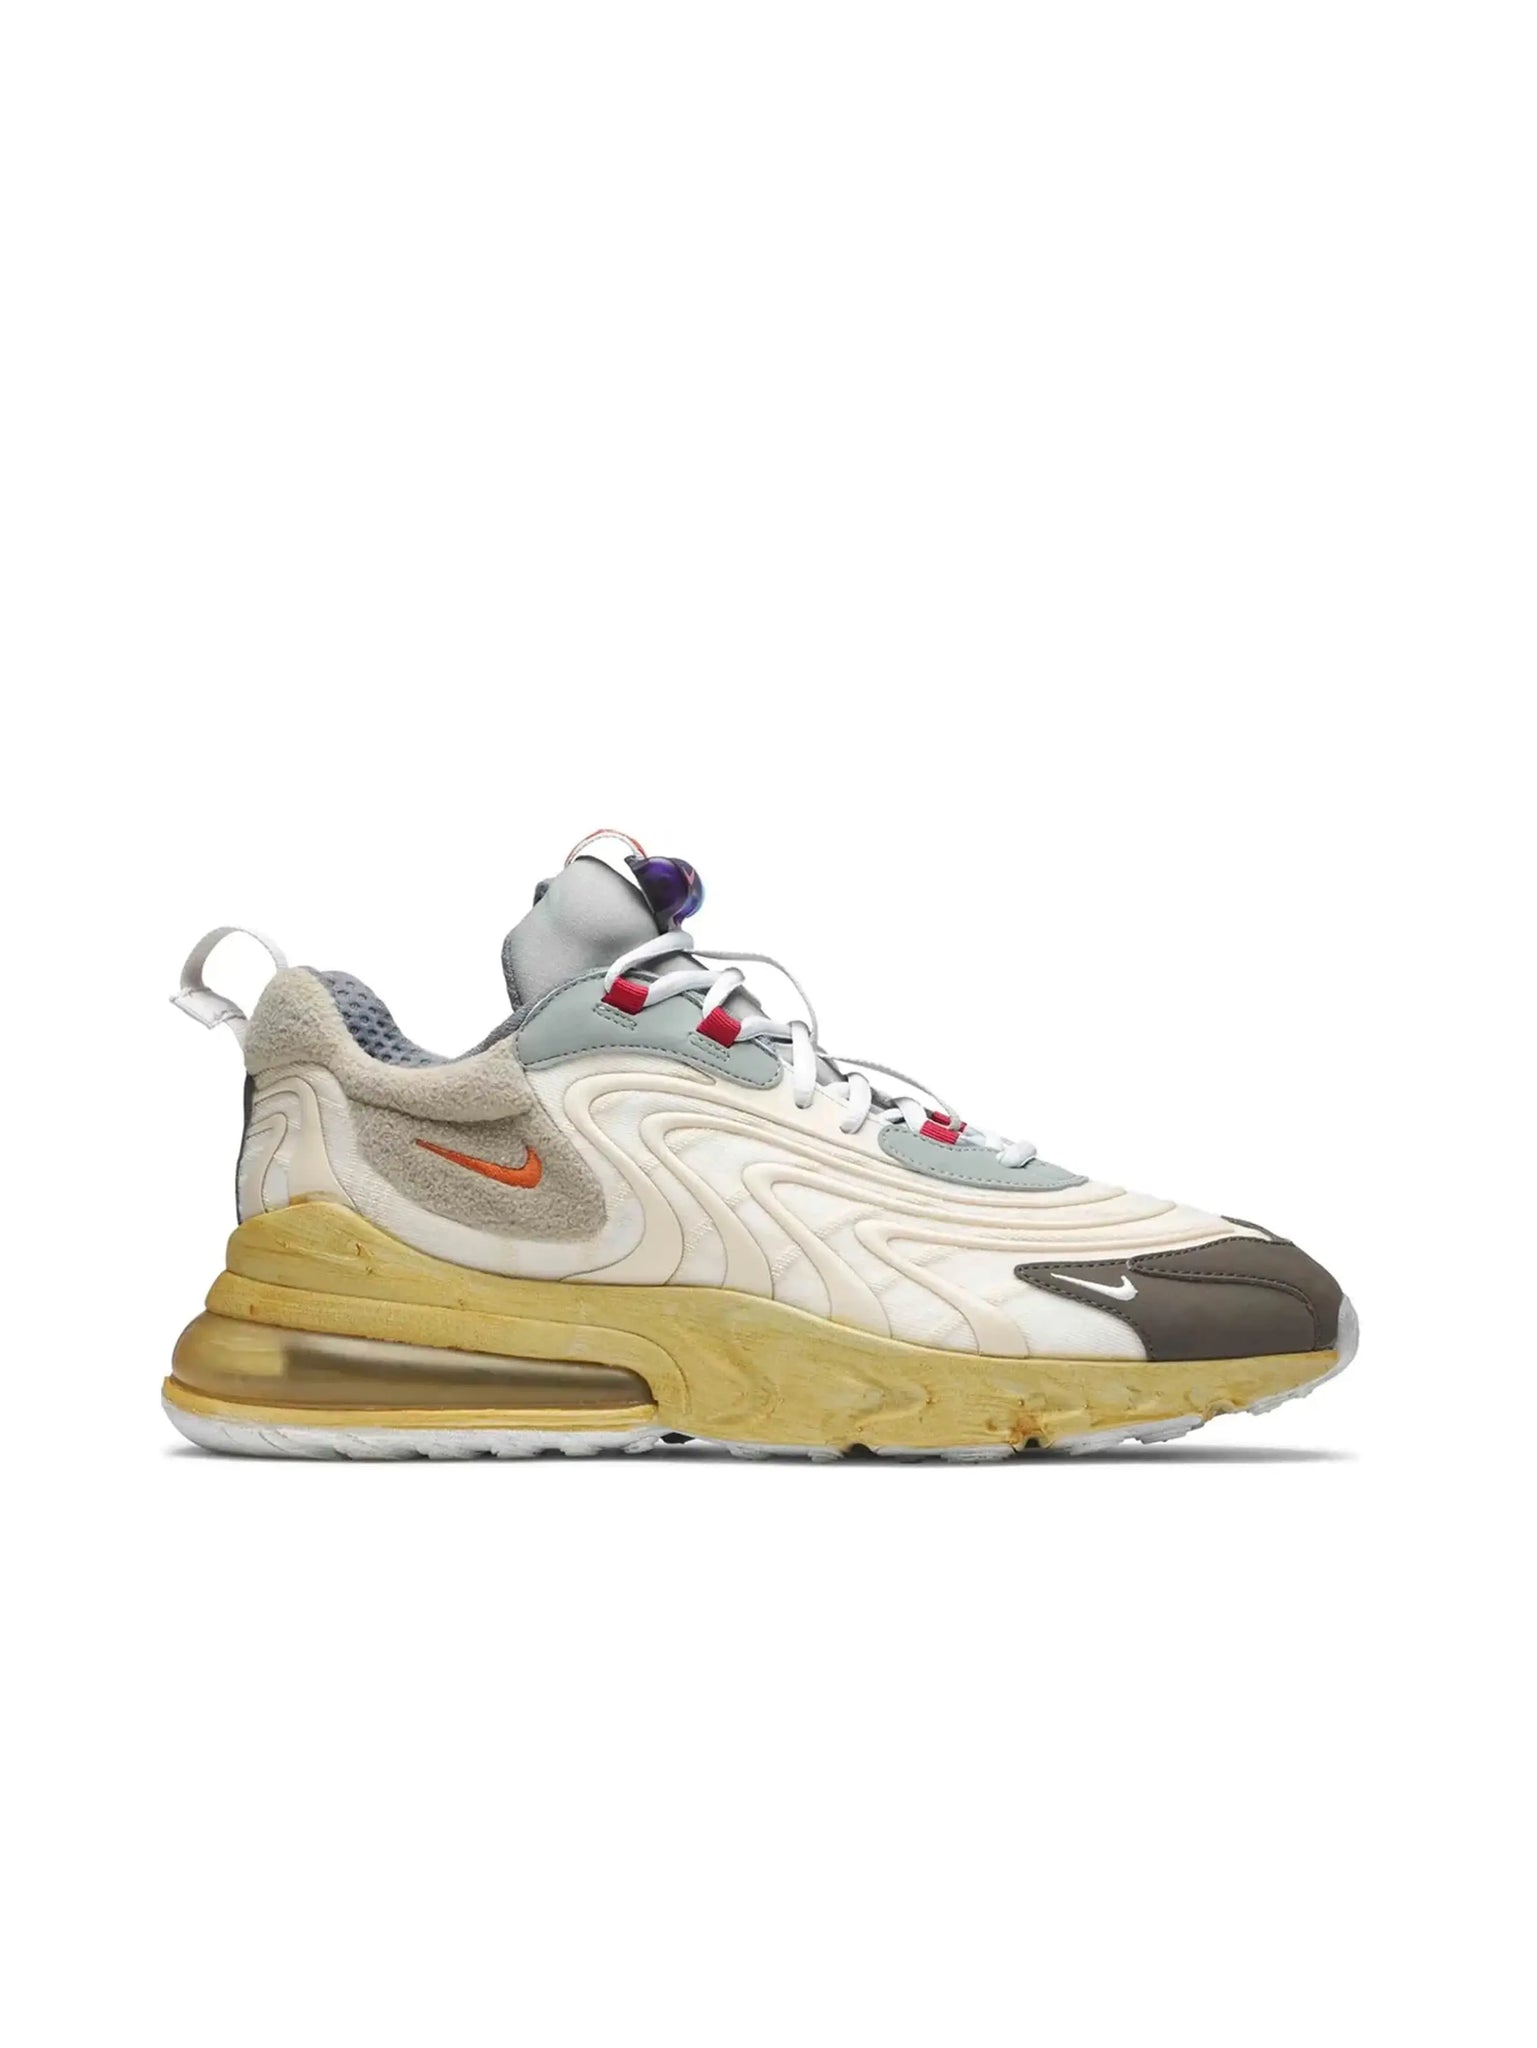 Nike Air Max 270 React ENG Travis Scott Cactus Trails in Auckland, New Zealand - Shop name